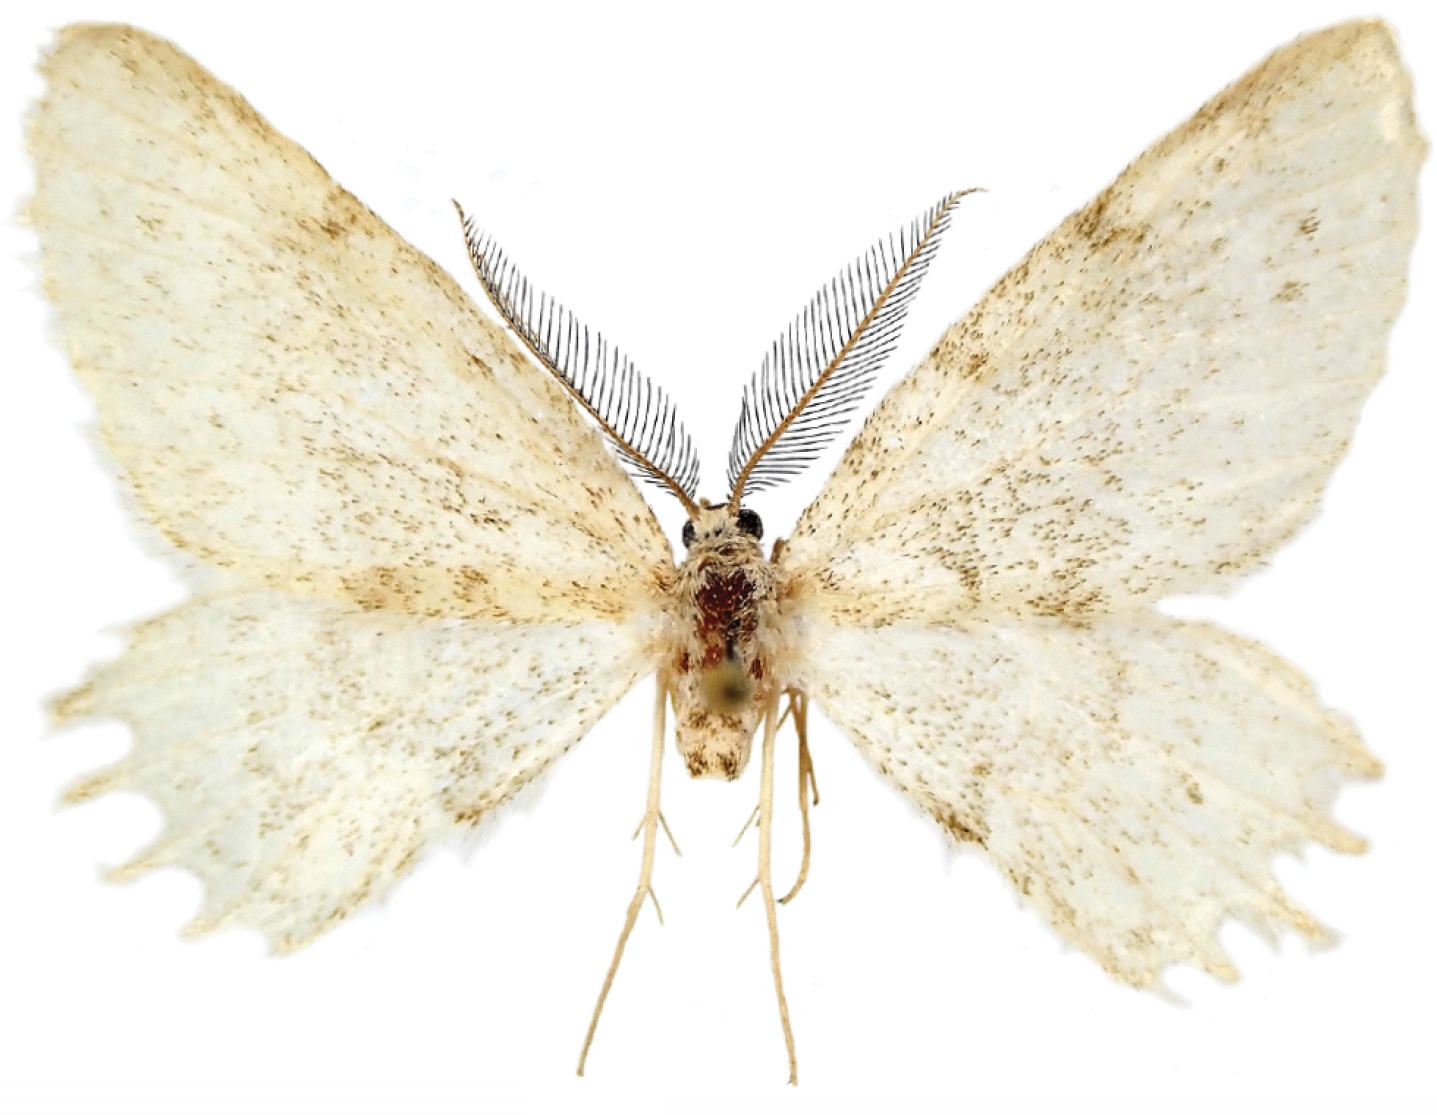 Scientists Discover Mysterious New Moth Species in Europe